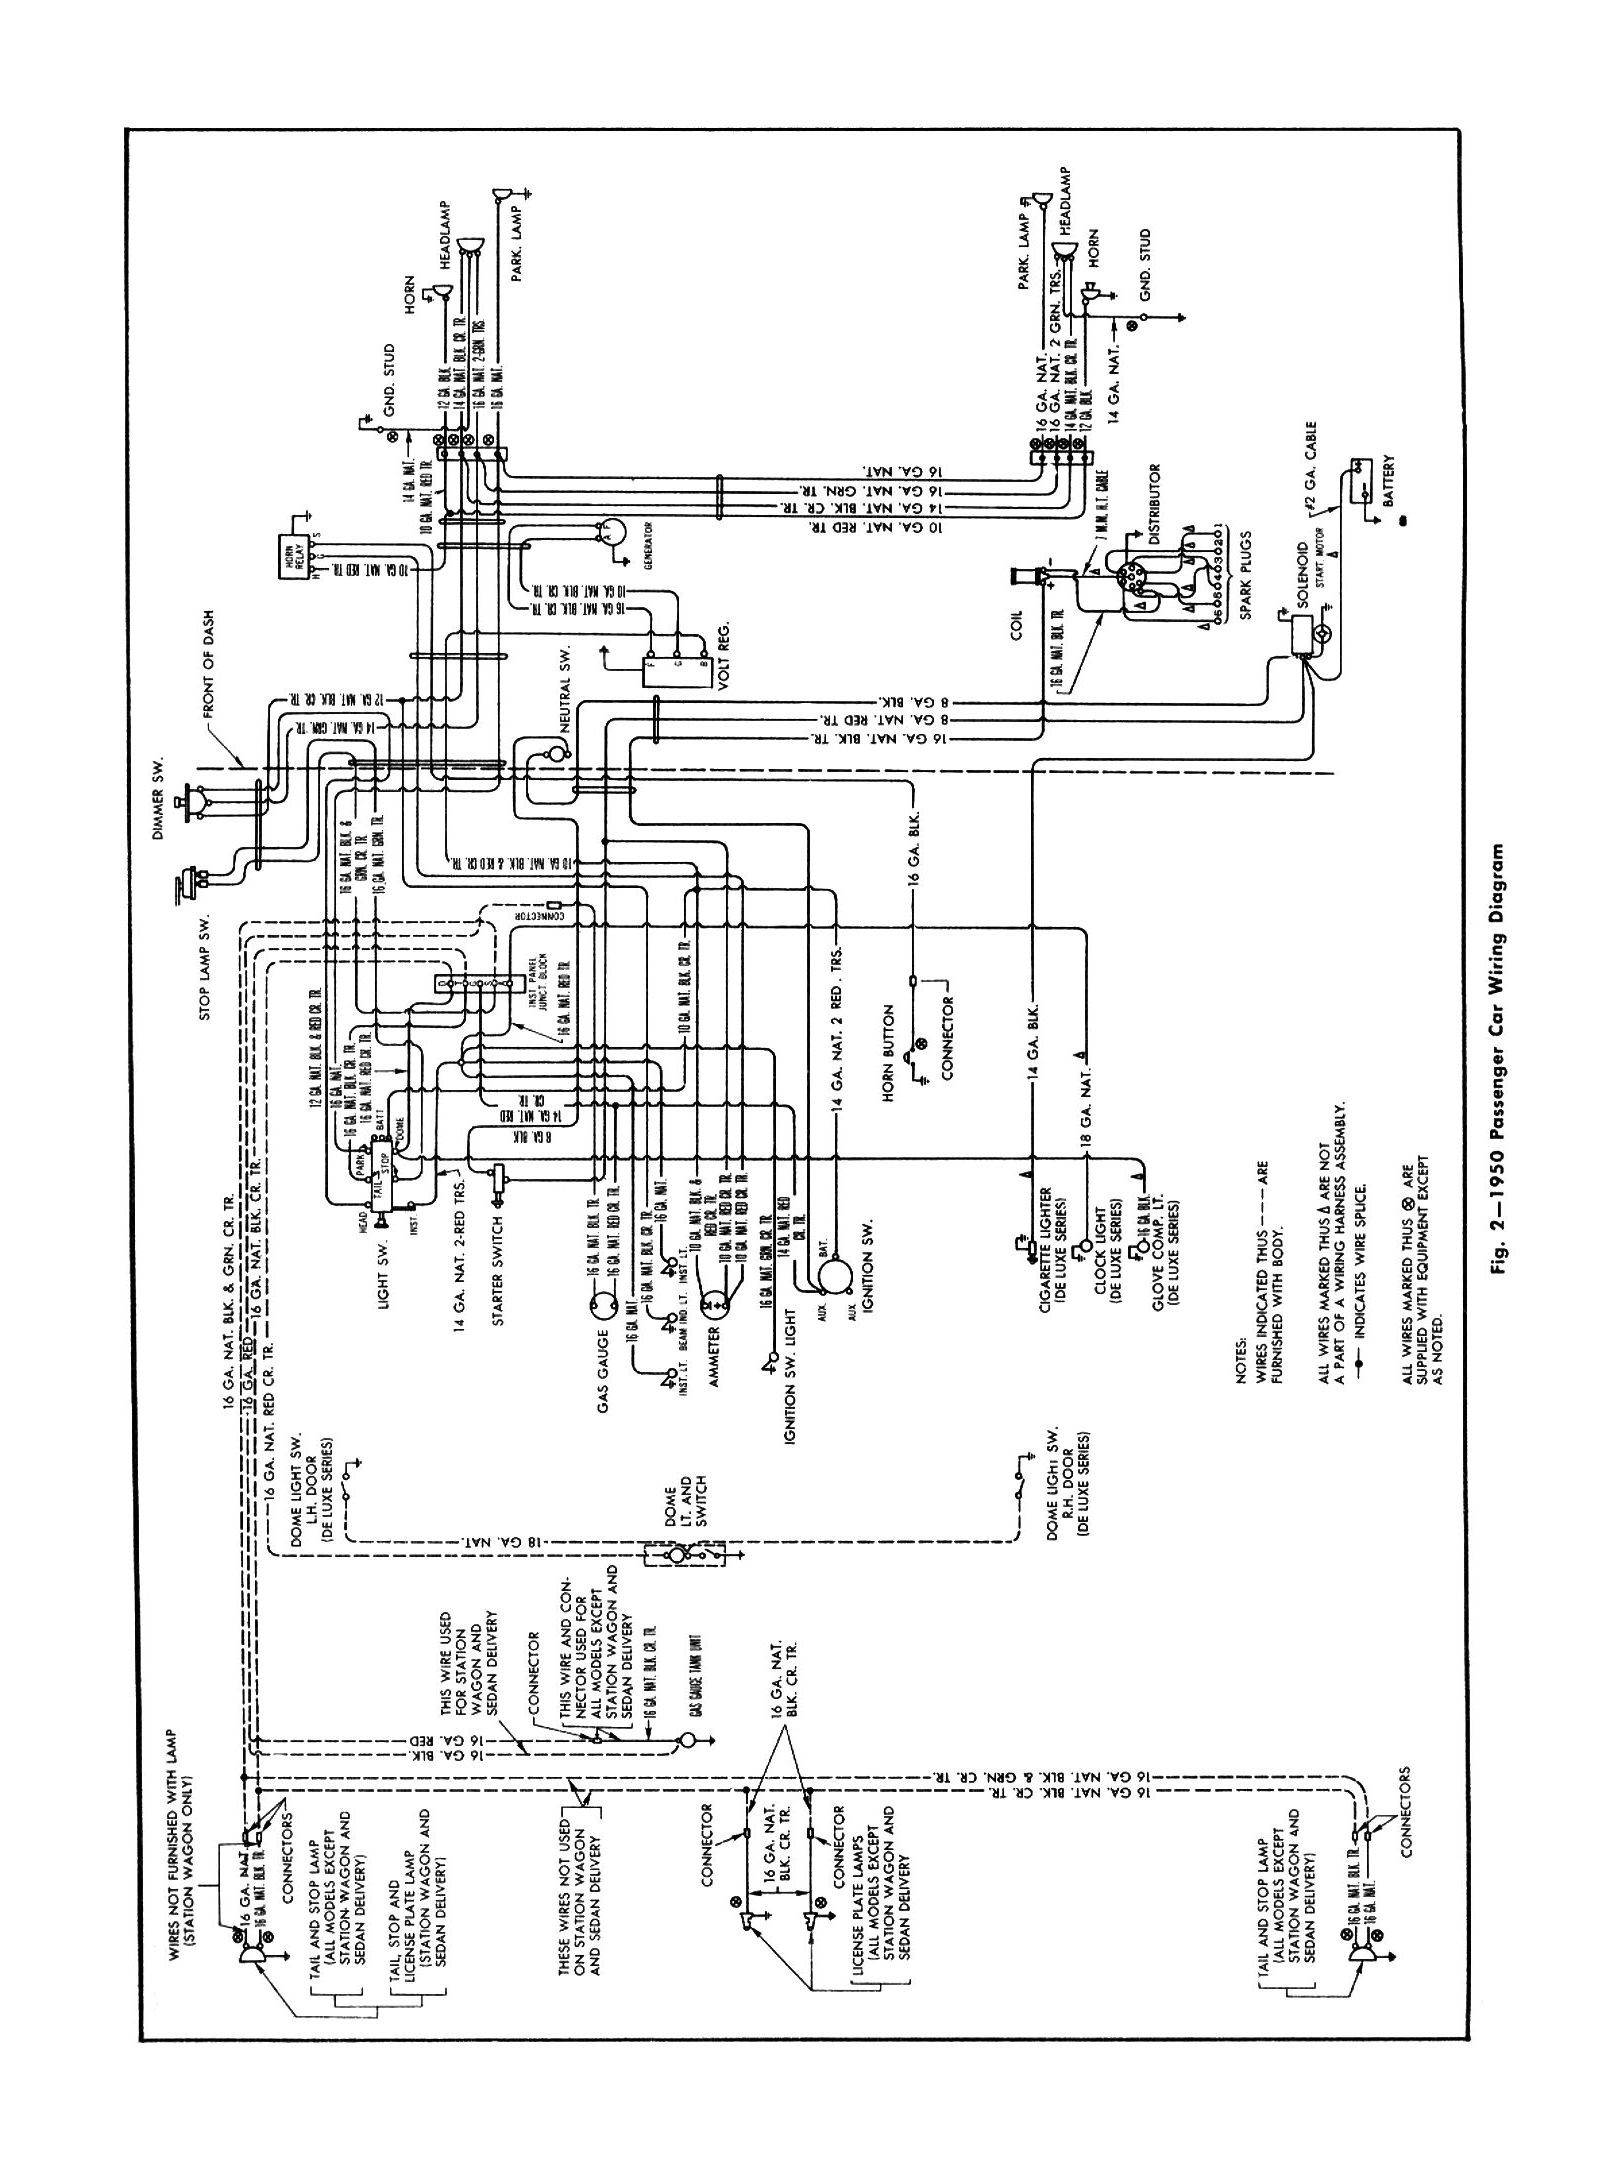 1966 Chevy Bel Air Ignition Switch Wiring Diagram from chevy.oldcarmanualproject.com